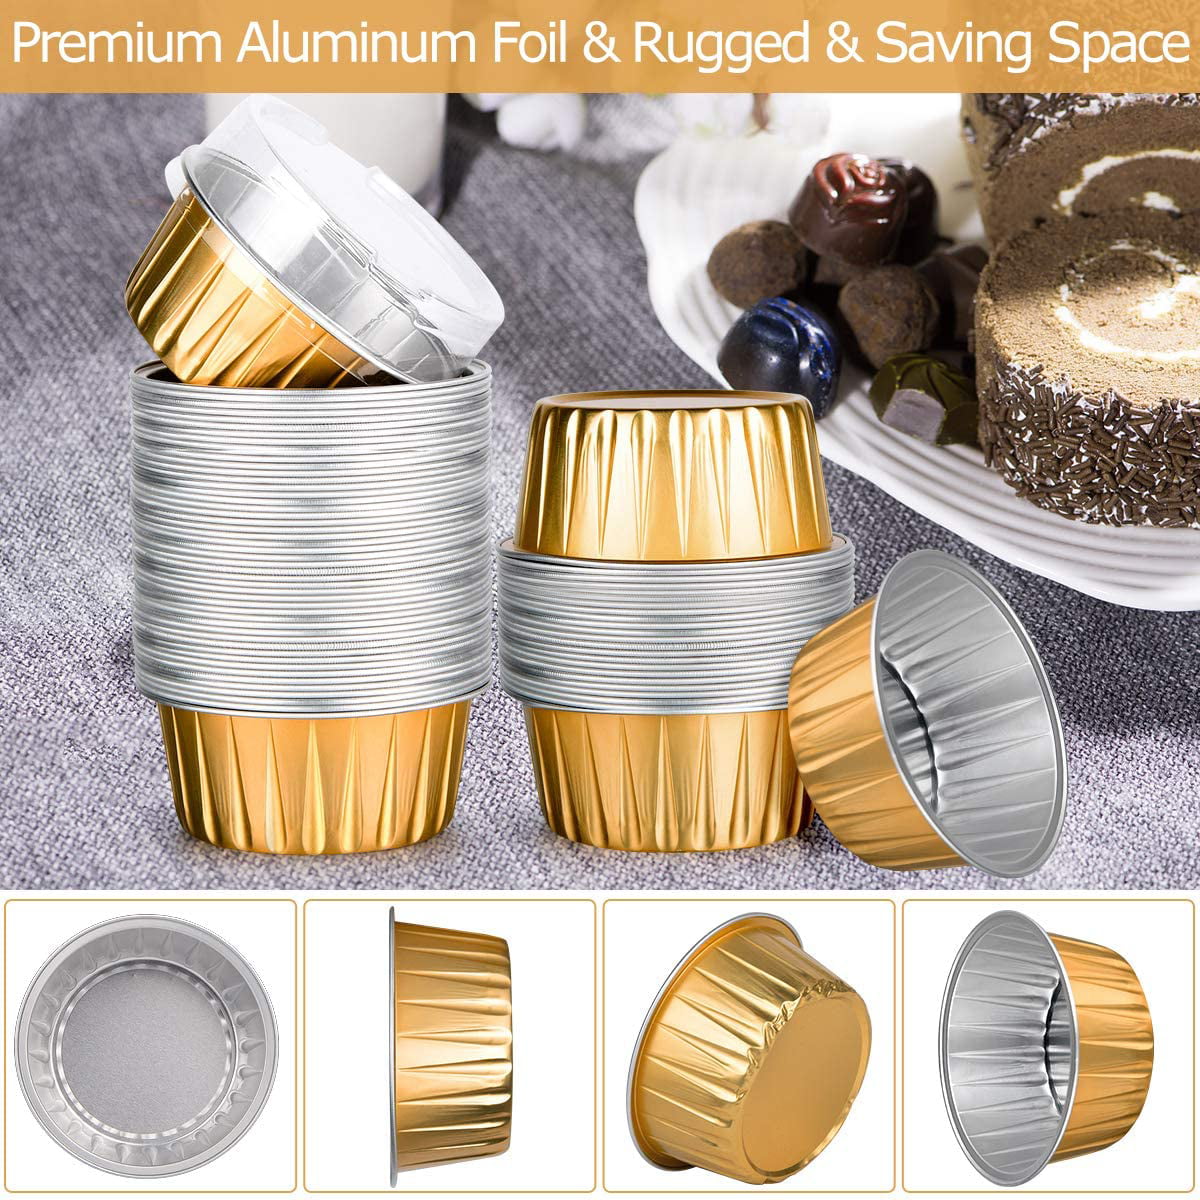 Aluminum Foil Baking Cups, 30Pcs Baking Cups Reusable Aluminum Foil Pans  Foil Cupcake Liners Foil Cake Pan for Grill Air Fryer Microwave Oven Steamer